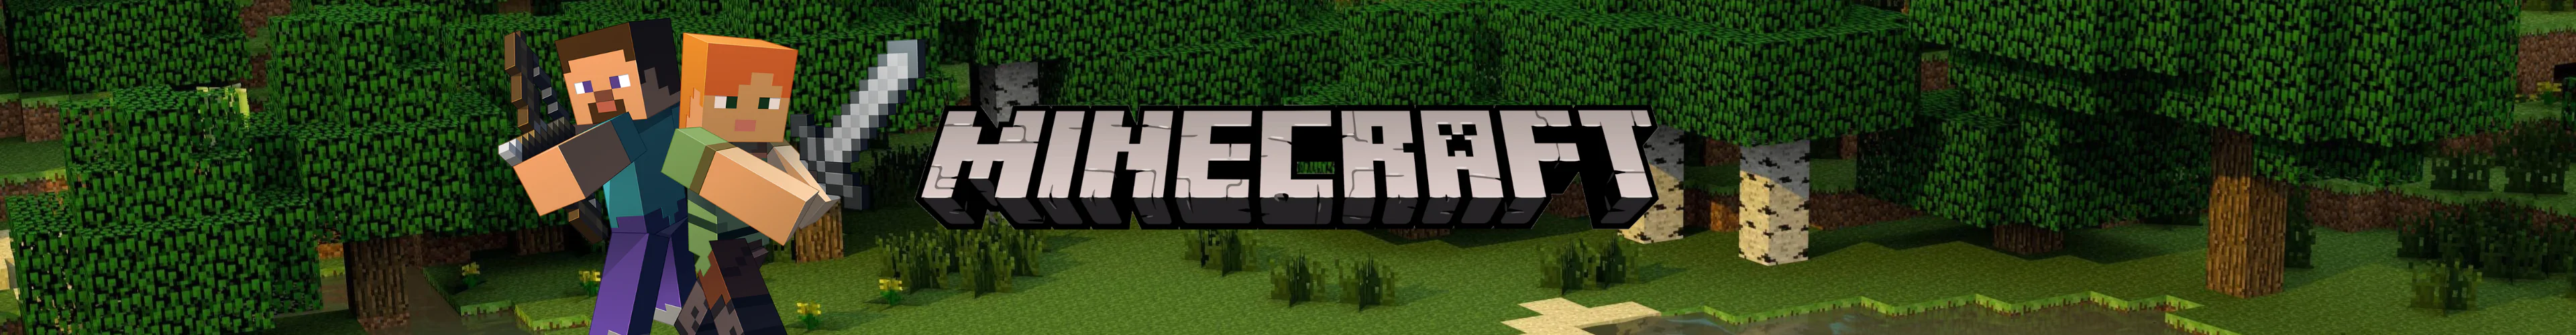 Minecraft products banner